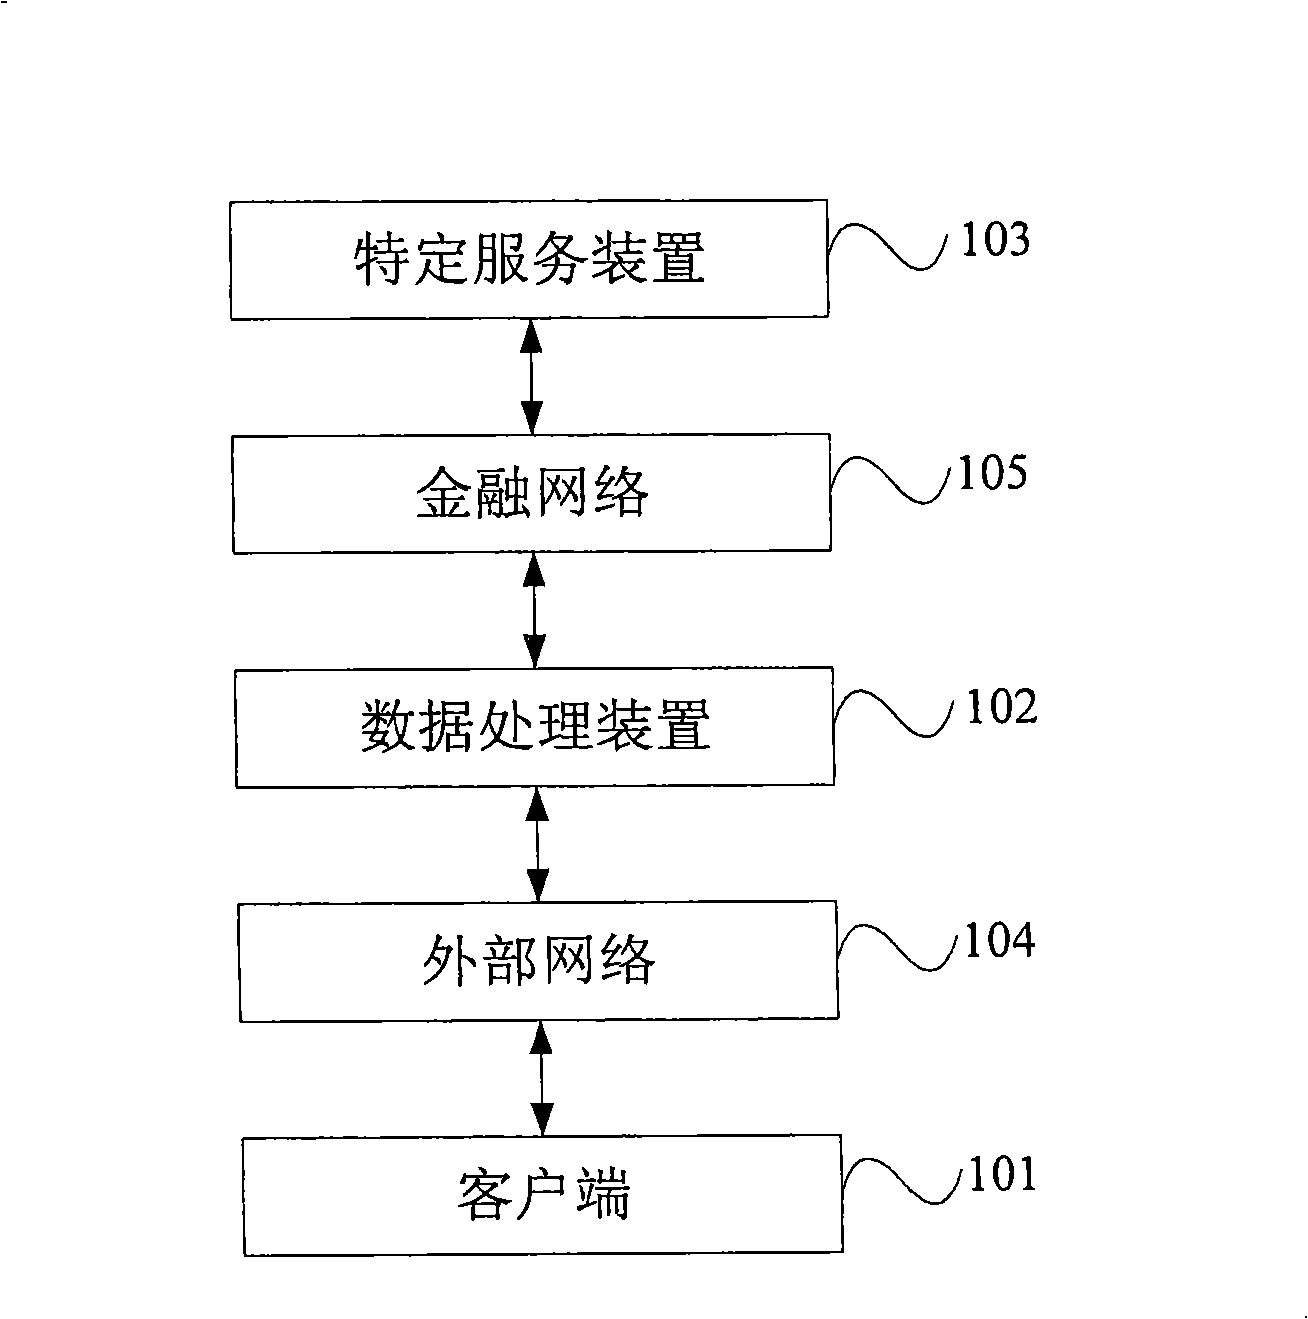 Method, apparatus and system for processing bank data